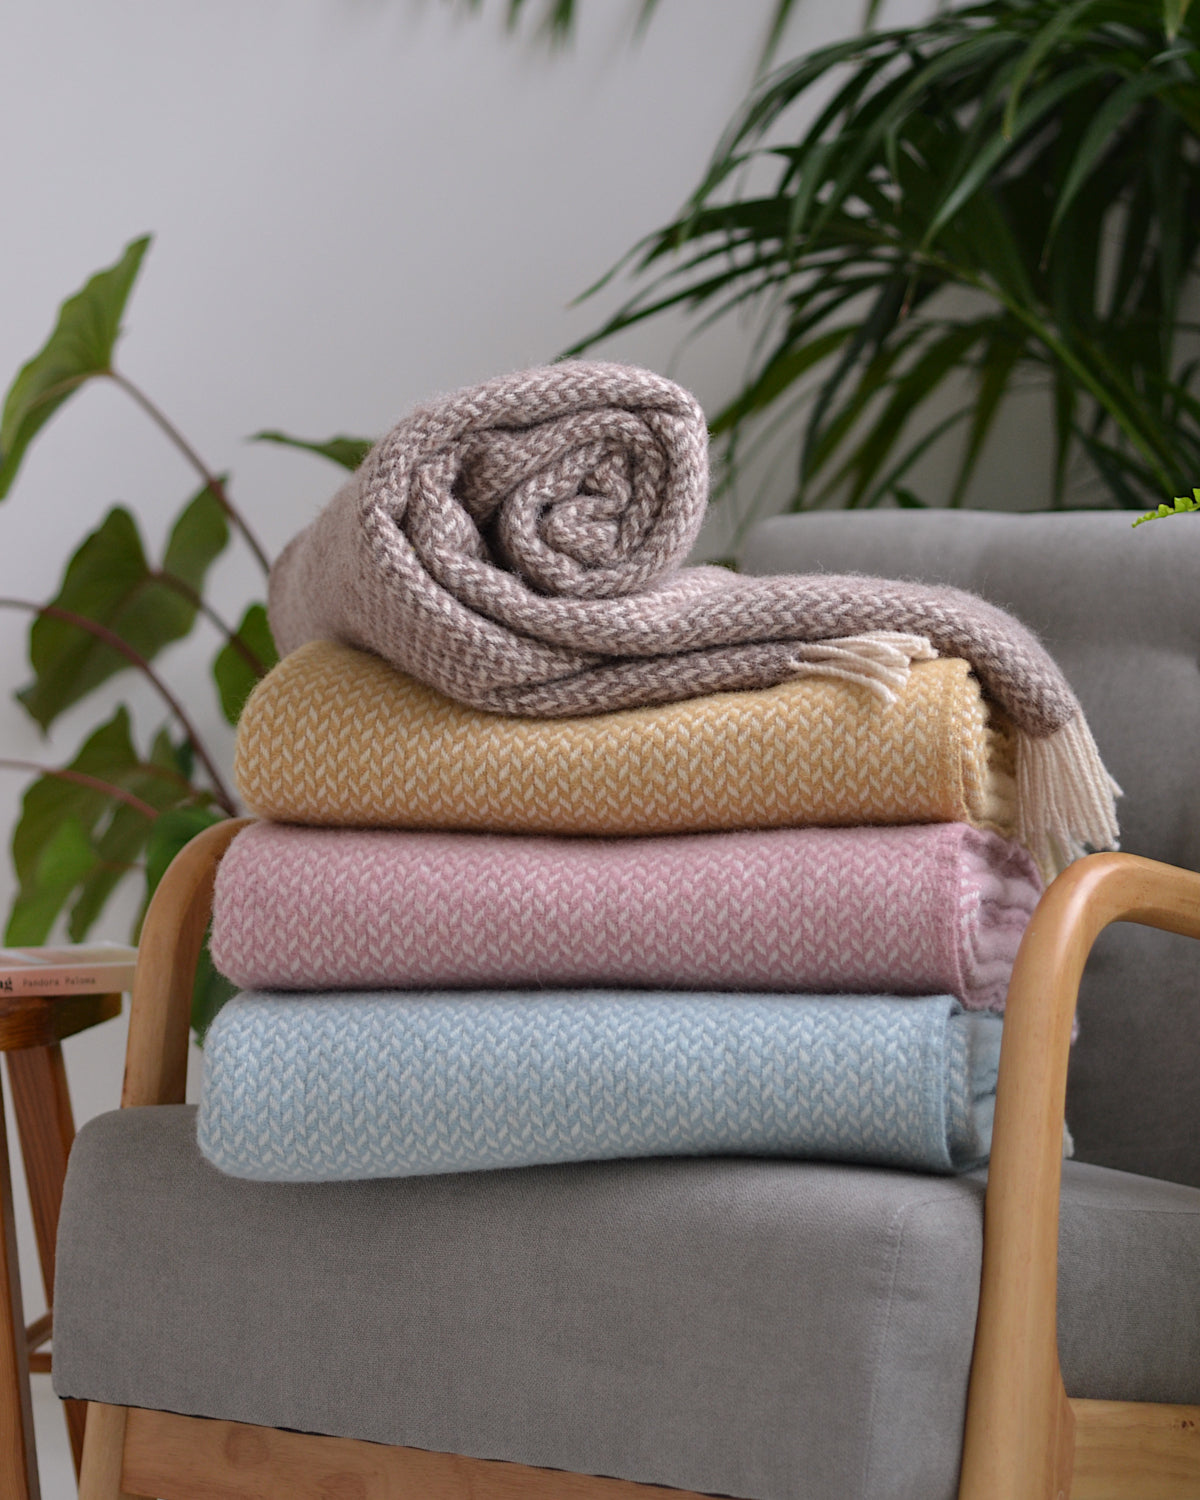 Four folded wool blankets stacked on a grey lounge chair.